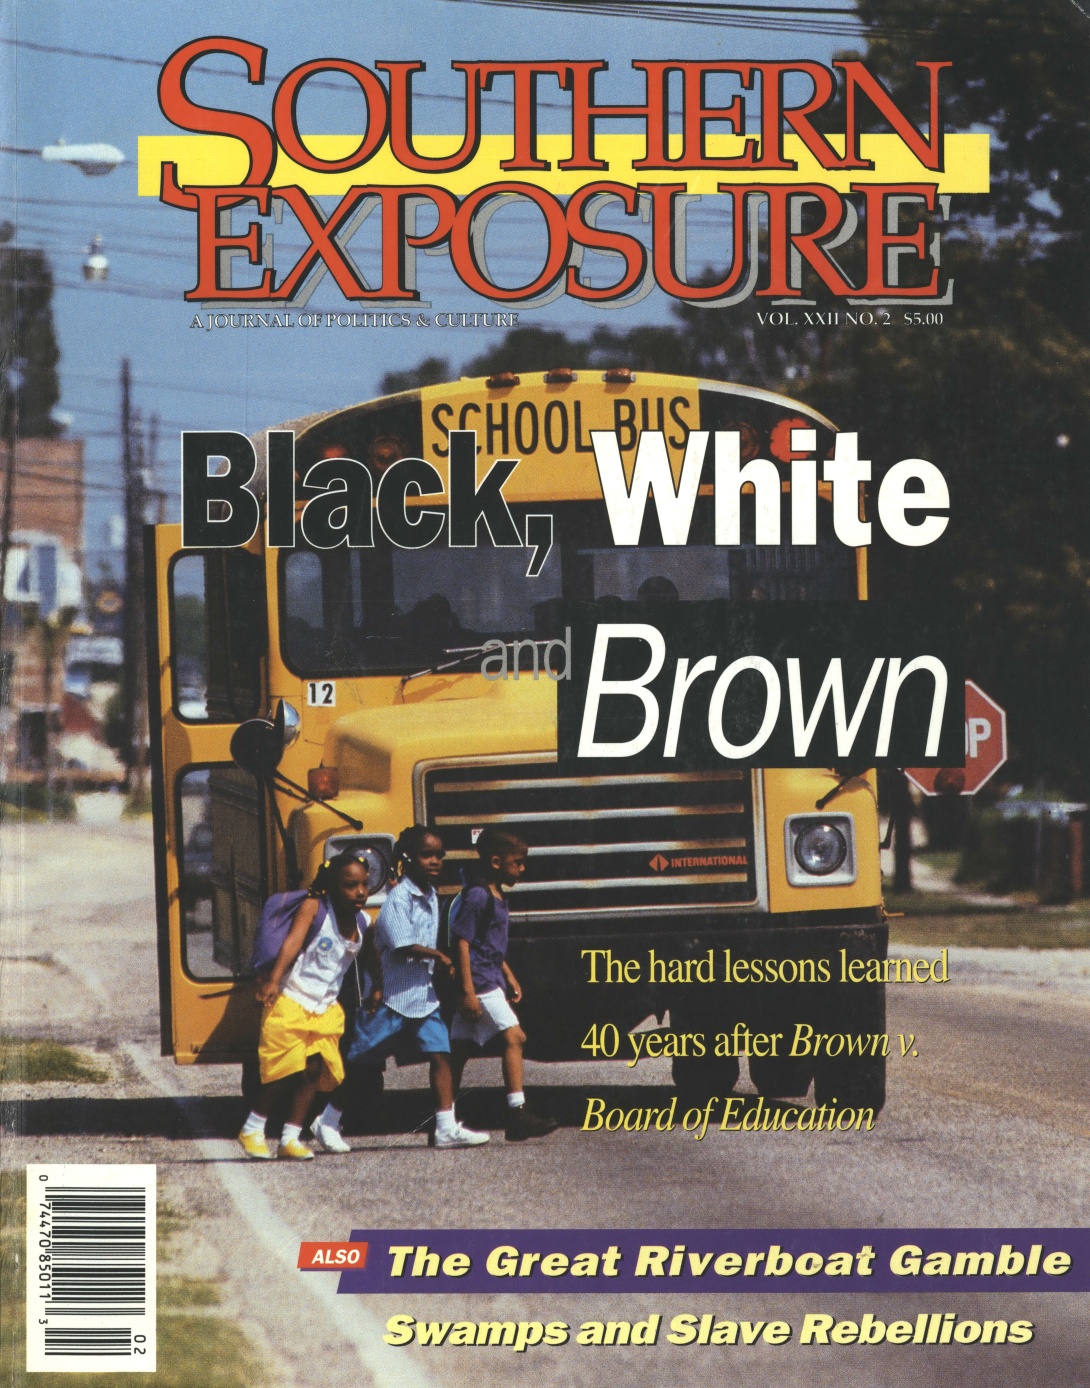 Magazine cover with photo of children running off a school bus, reading "Black, White and Borwn: The hard lessons learned 40 years after Brown v. Board of Education"